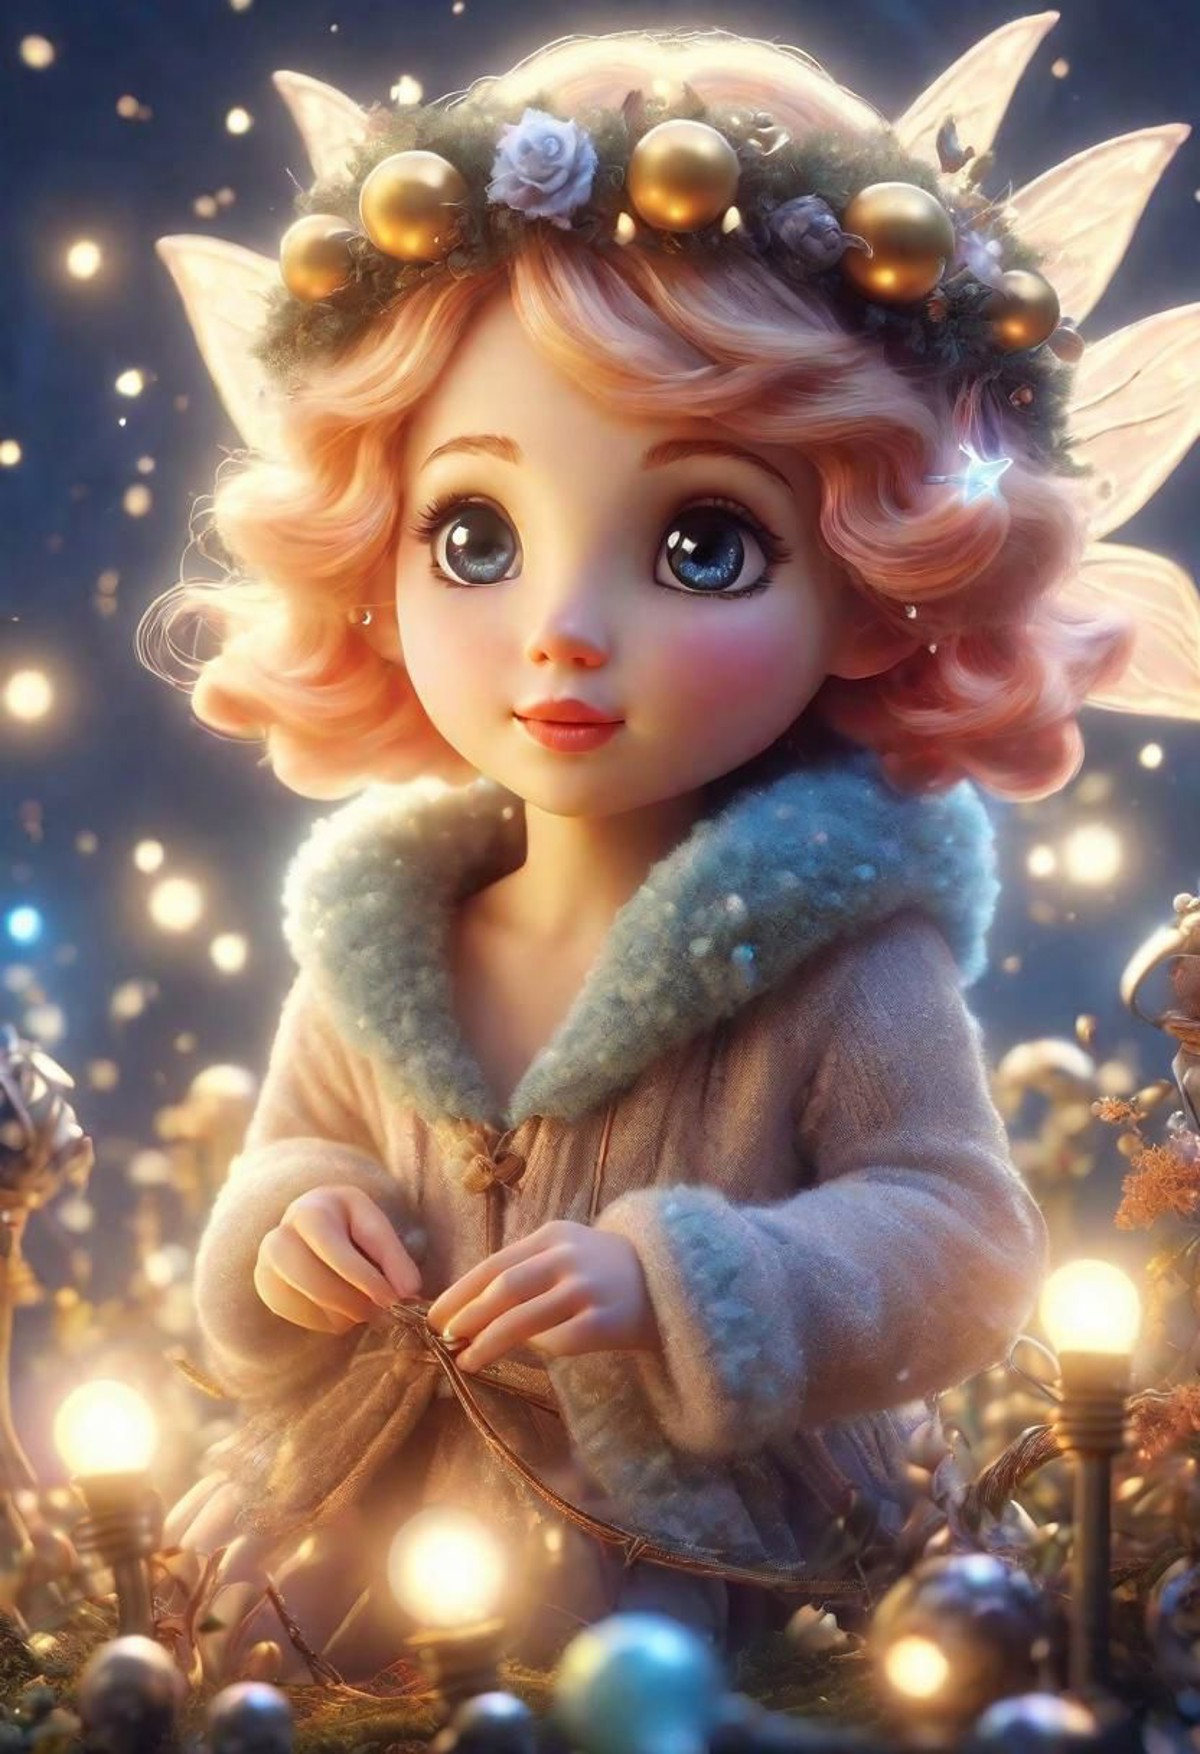 Cute Fairy, beautiful clouds and stars, mysterious glow of light bulbs and night lights, photorealistic fairy tale